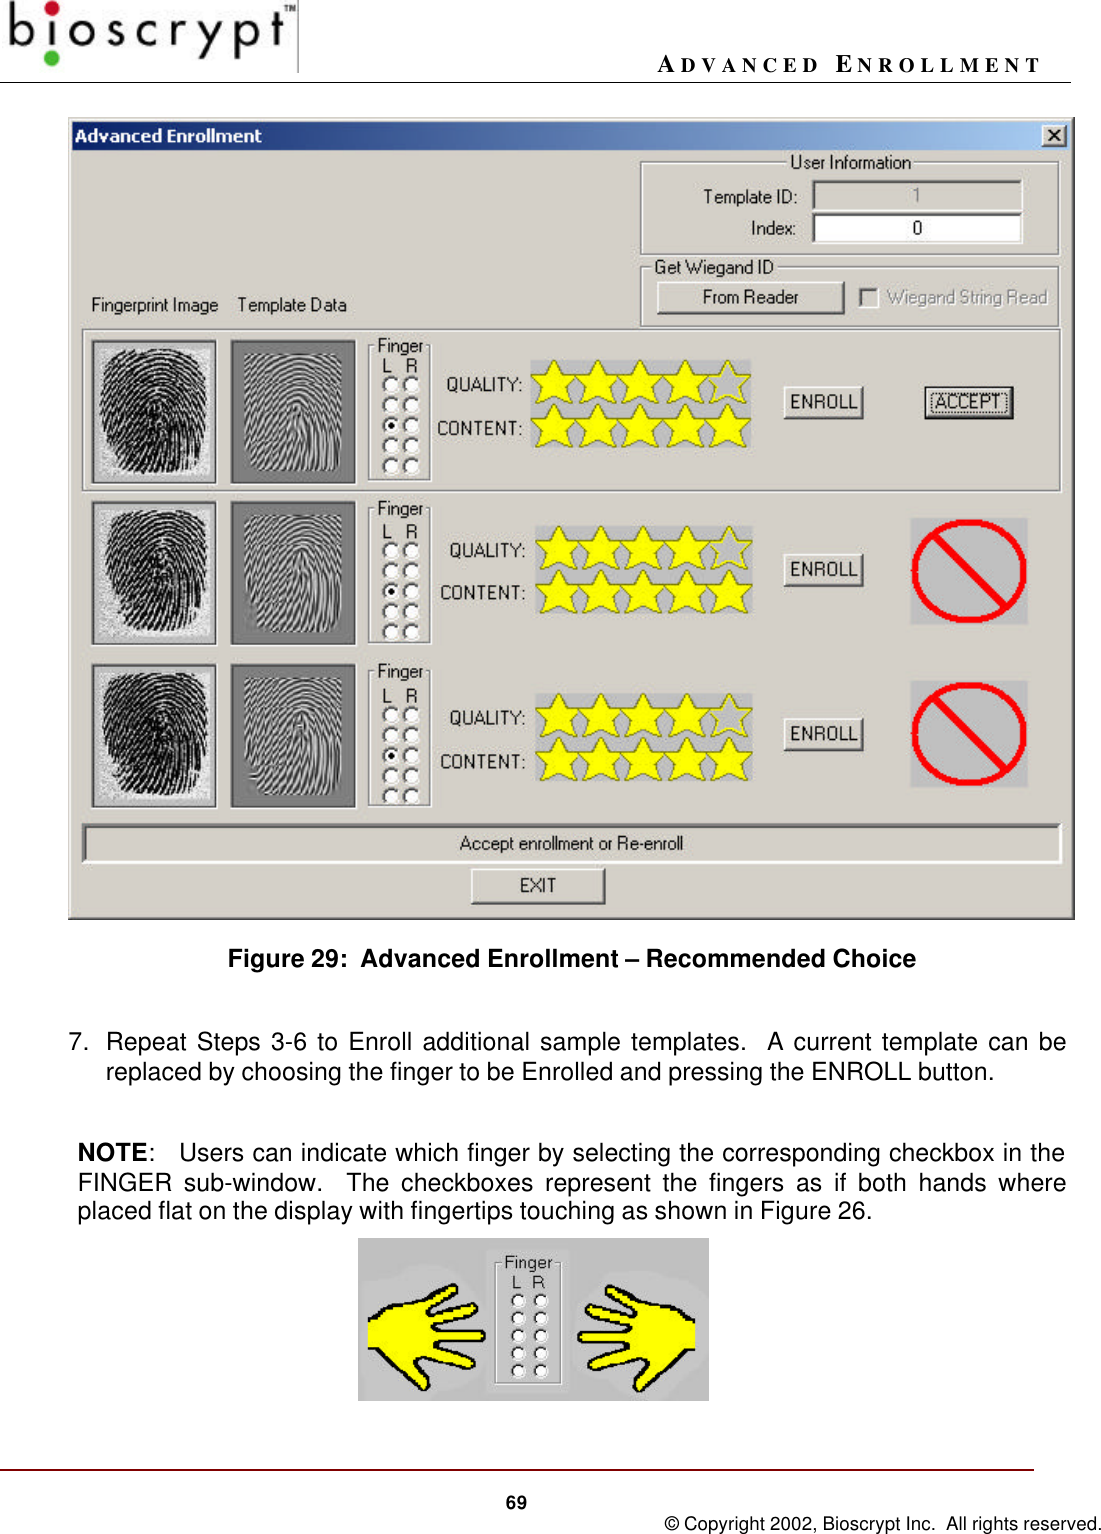 ADVANCED ENROLLMENT69 © Copyright 2002, Bioscrypt Inc.  All rights reserved.Figure 29:  Advanced Enrollment – Recommended Choice7. Repeat Steps 3-6 to Enroll additional sample templates.  A current template can bereplaced by choosing the finger to be Enrolled and pressing the ENROLL button.NOTE:   Users can indicate which finger by selecting the corresponding checkbox in theFINGER sub-window.  The checkboxes represent the fingers as if both hands whereplaced flat on the display with fingertips touching as shown in Figure 26.